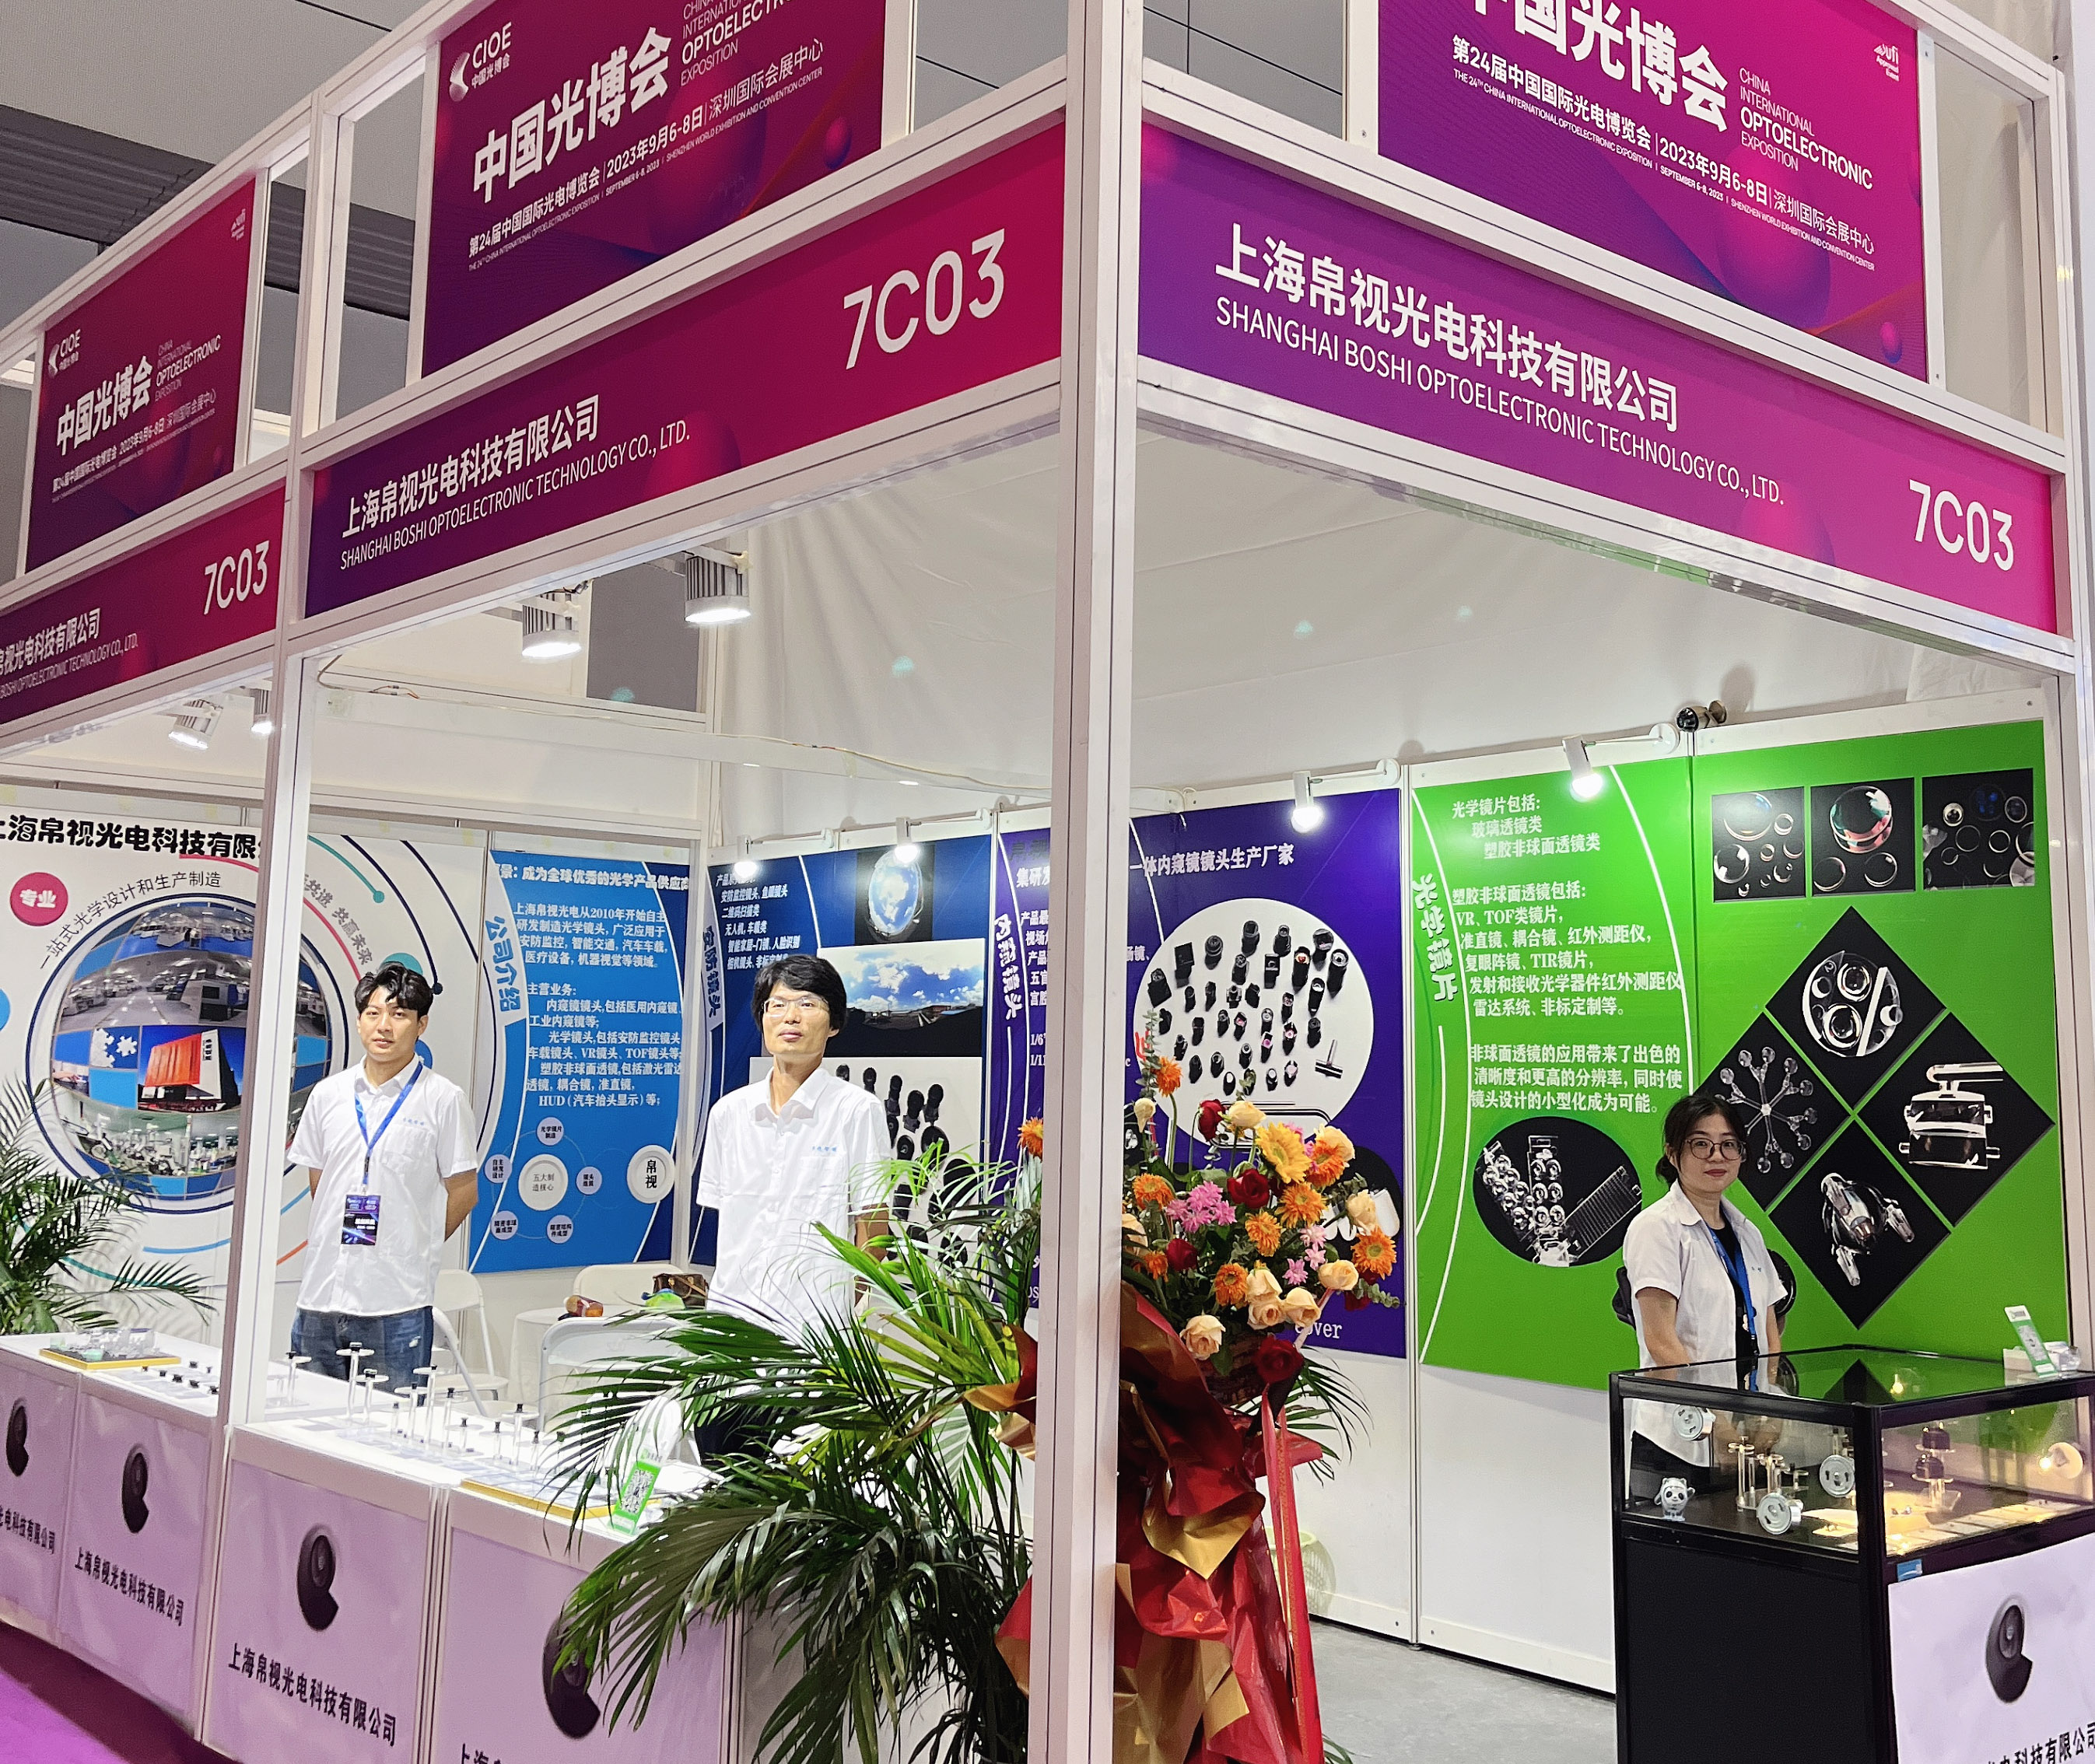 Silk Vision Optoelectronics Appears at the 24th China International Optoelectronics Exhibition